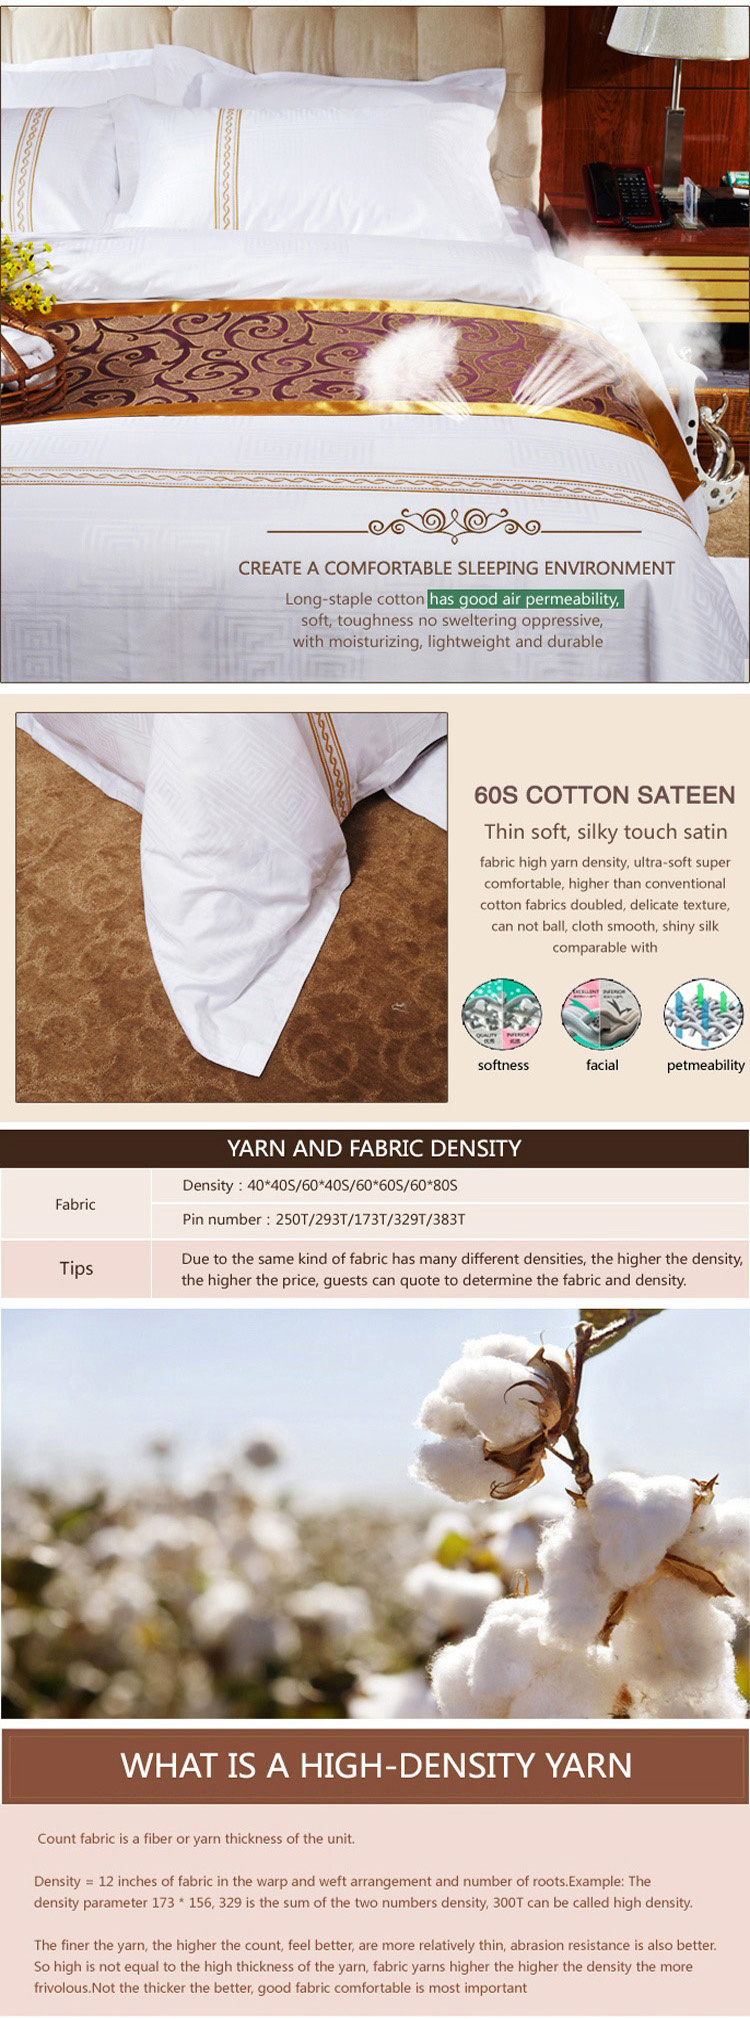 Pure Linen Bedding Bed Sheets Hotels Bedding Sets Hotel Products